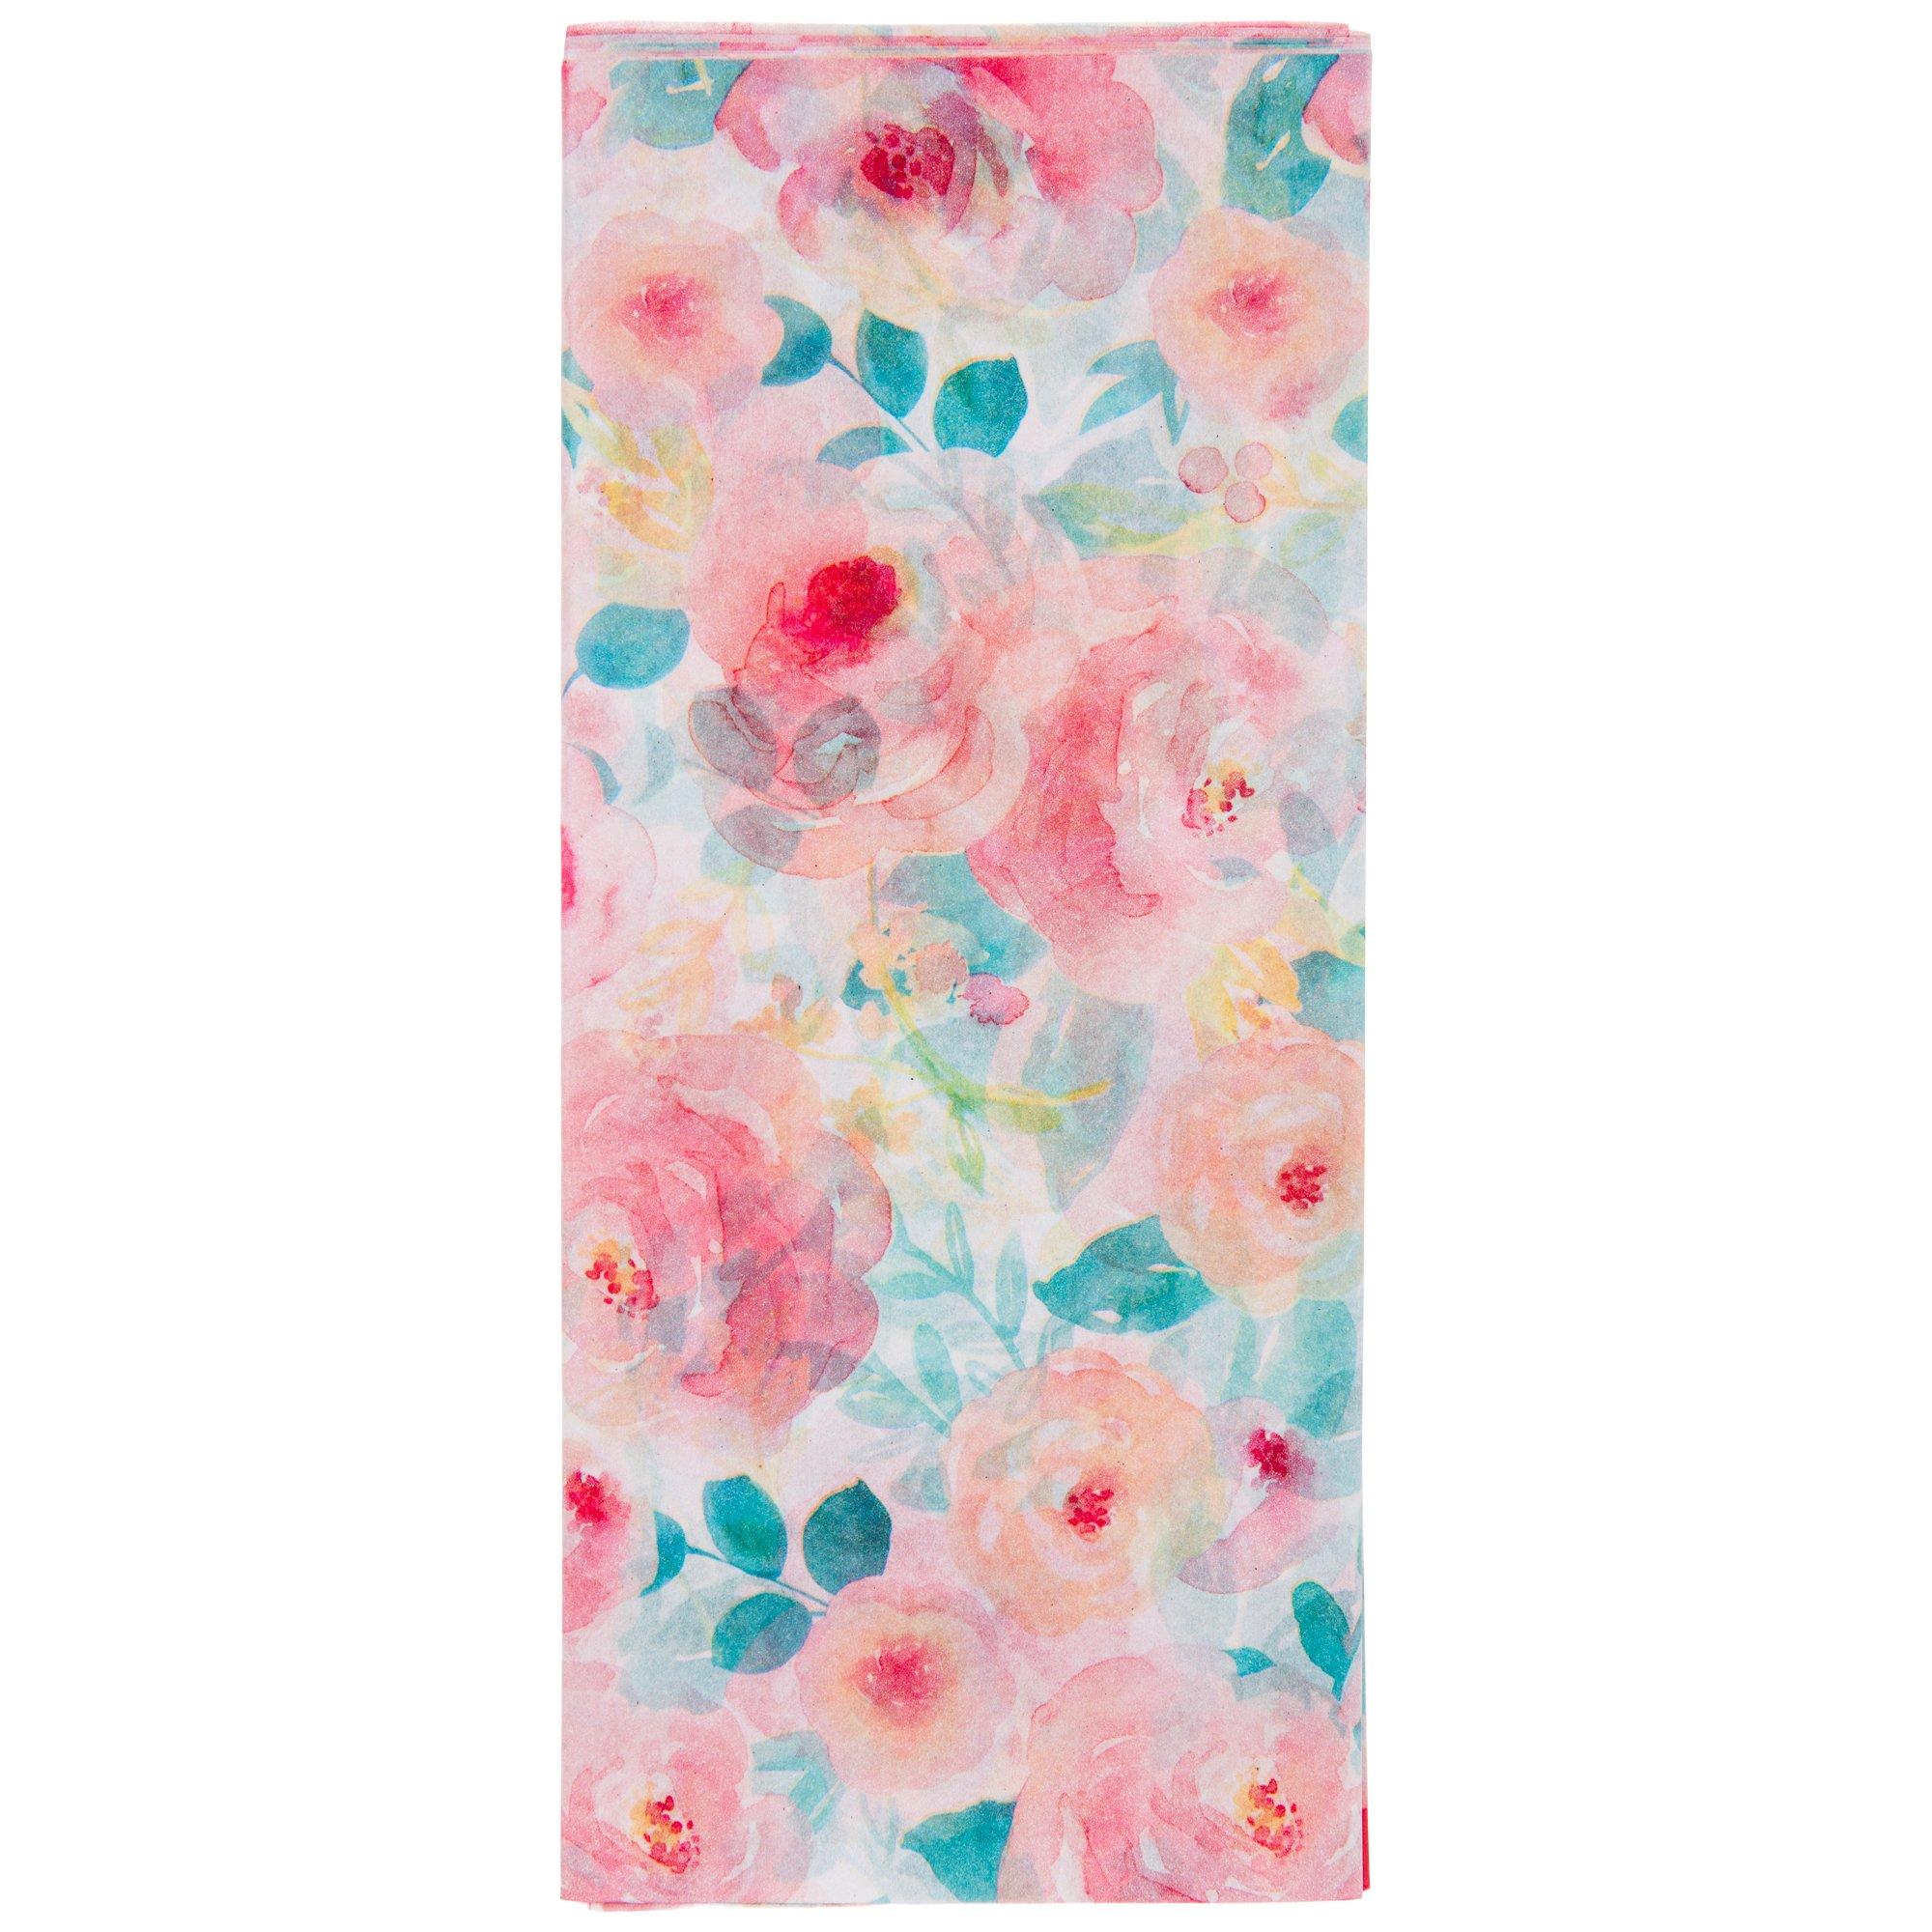 Watercolor Floral Tissue Paper | Hobby Lobby | 2193654